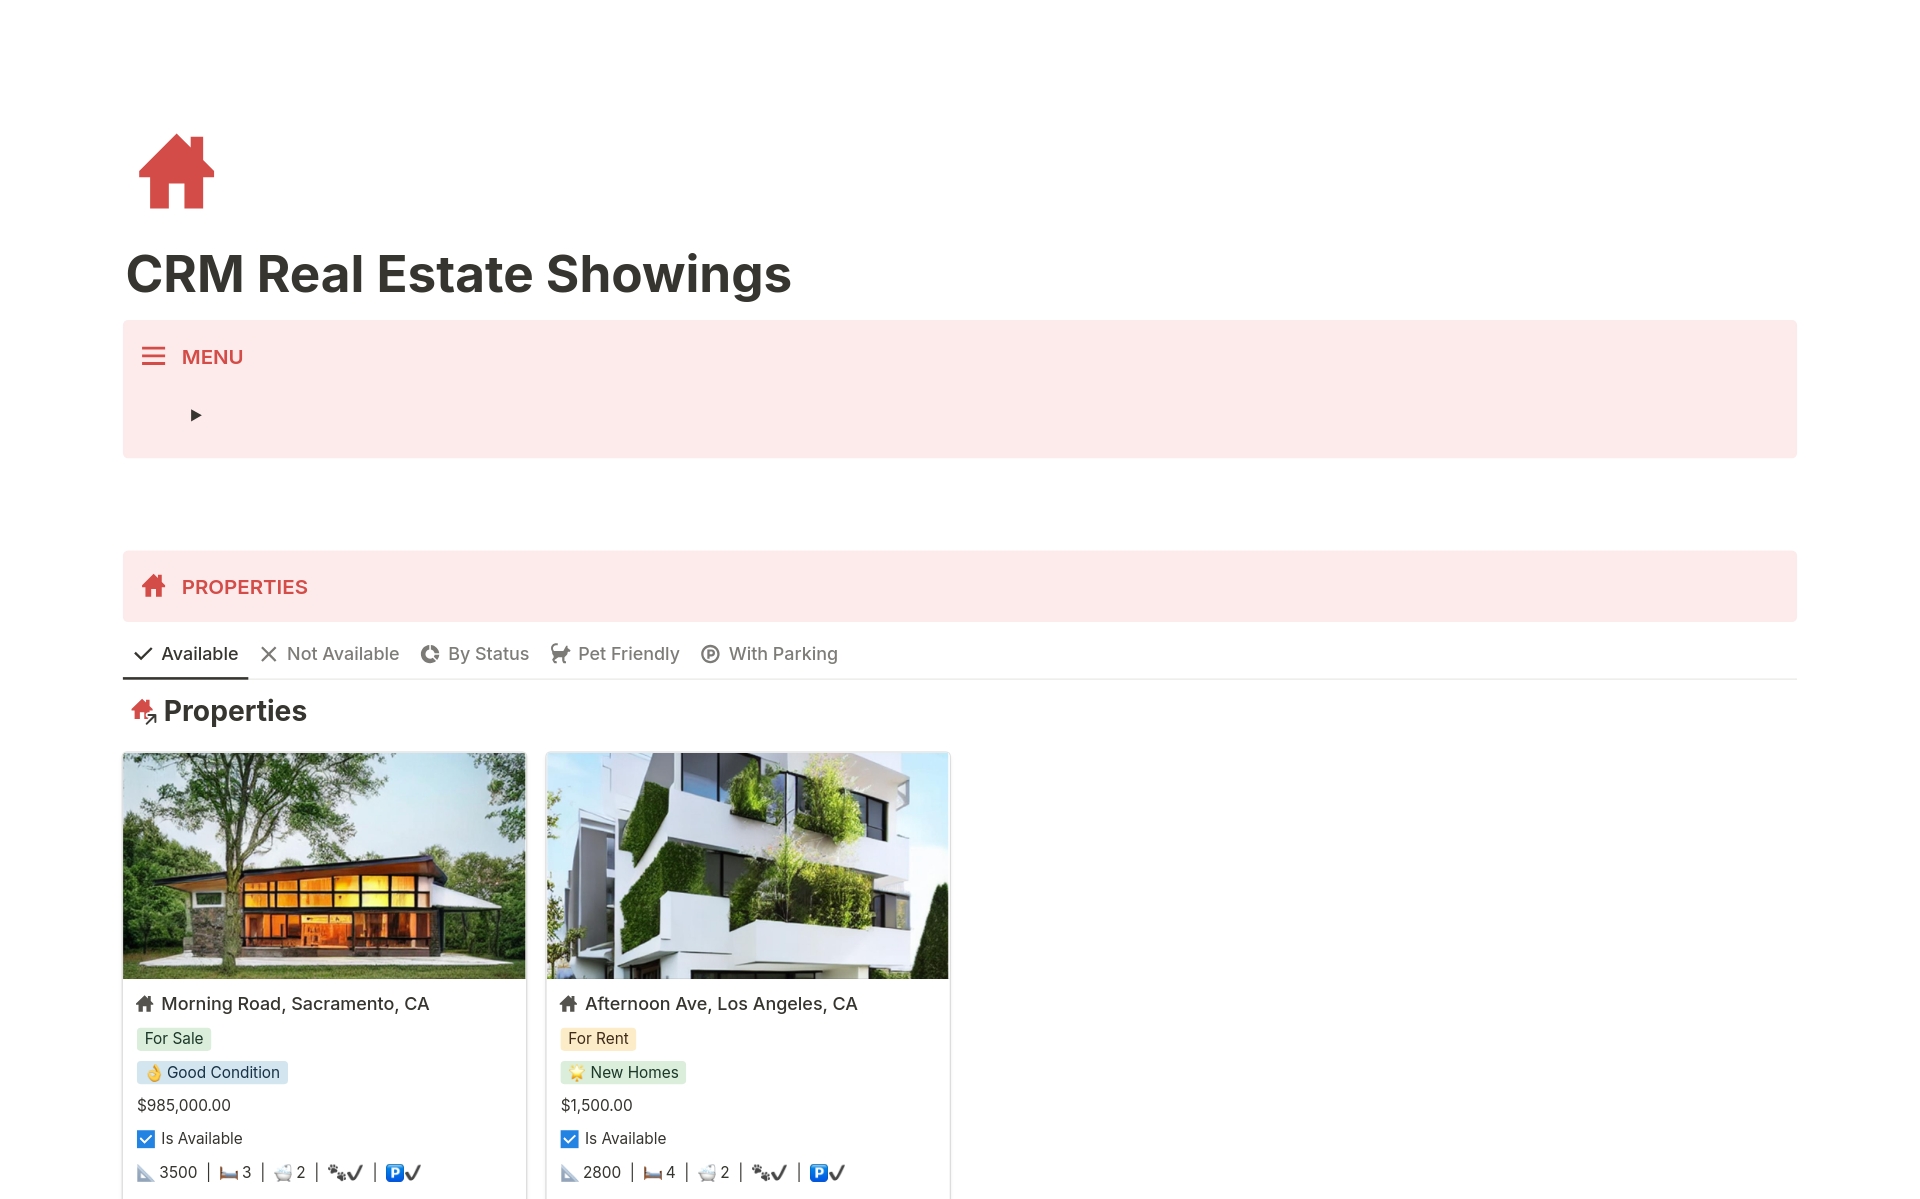 The perfect Notion template for scheduling visits to your properties for sale or rent. Whether you're an individual real estate agent or an owner, this tool is ideal for you.